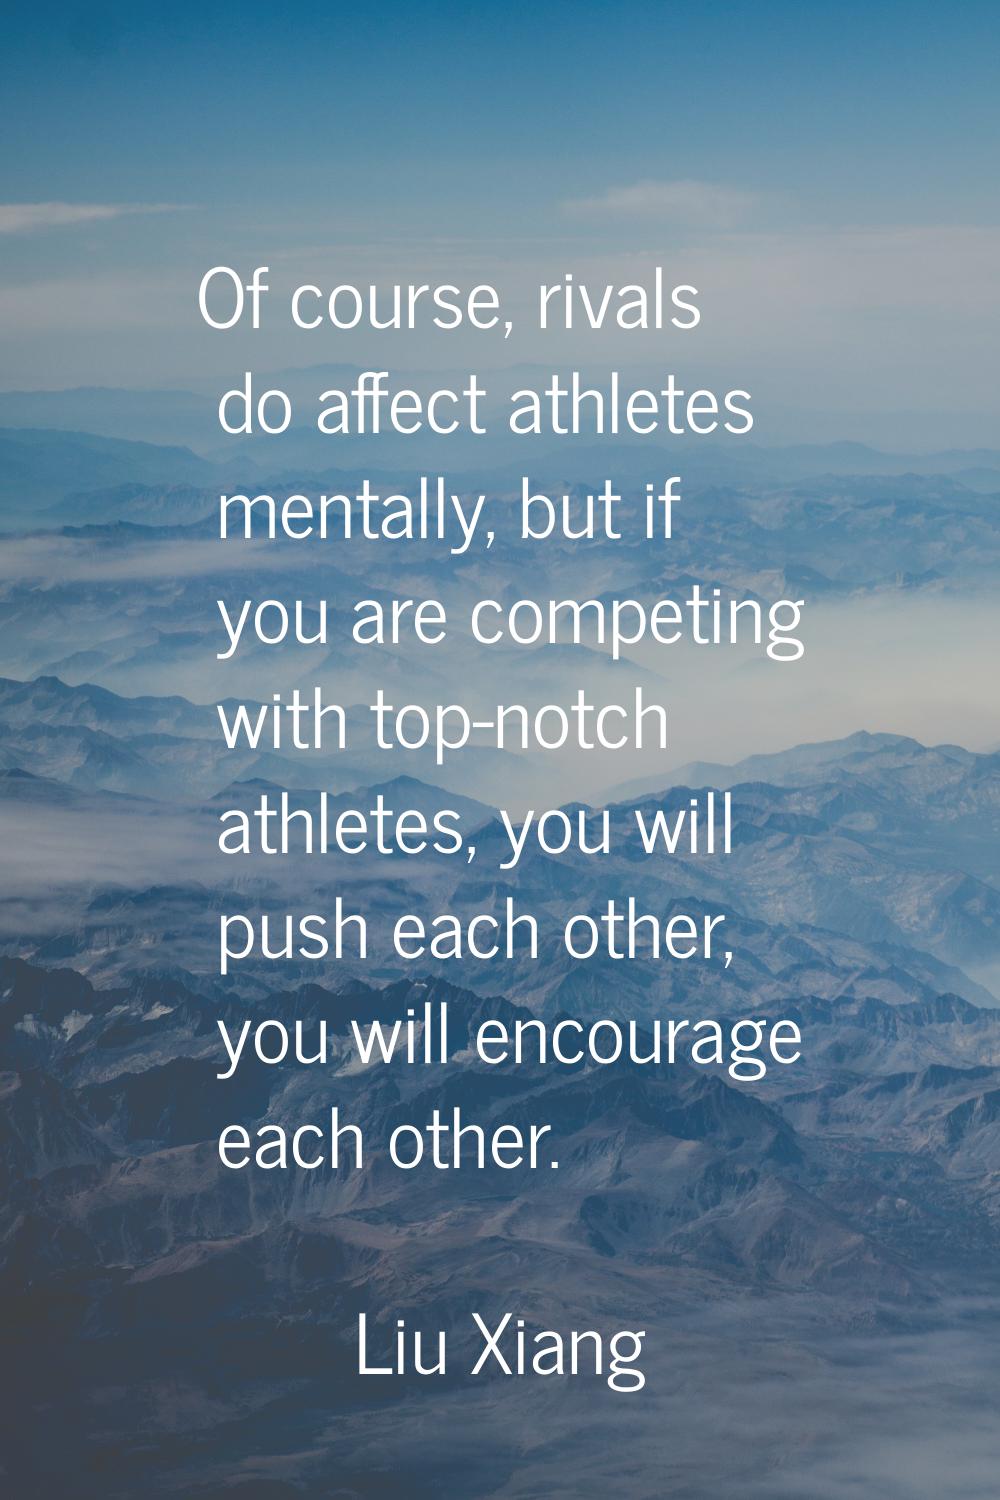 Of course, rivals do affect athletes mentally, but if you are competing with top-notch athletes, yo